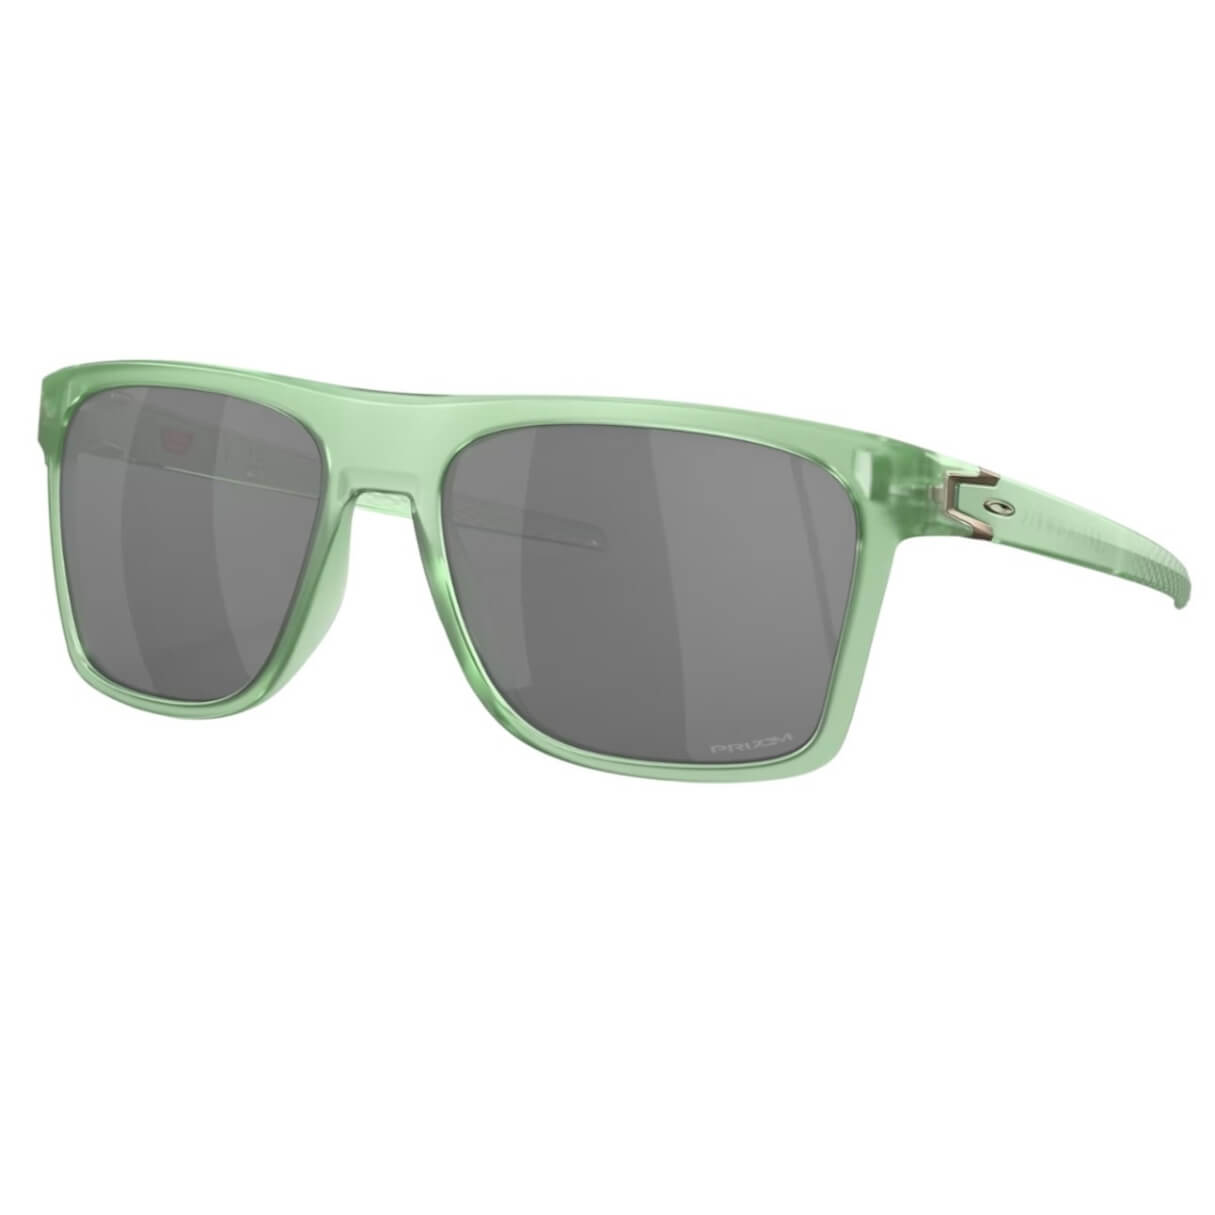 Oakley OO9100 Leffingwell 910017 Sunglasses - Matte Jade with Prizm Lens Full Side View